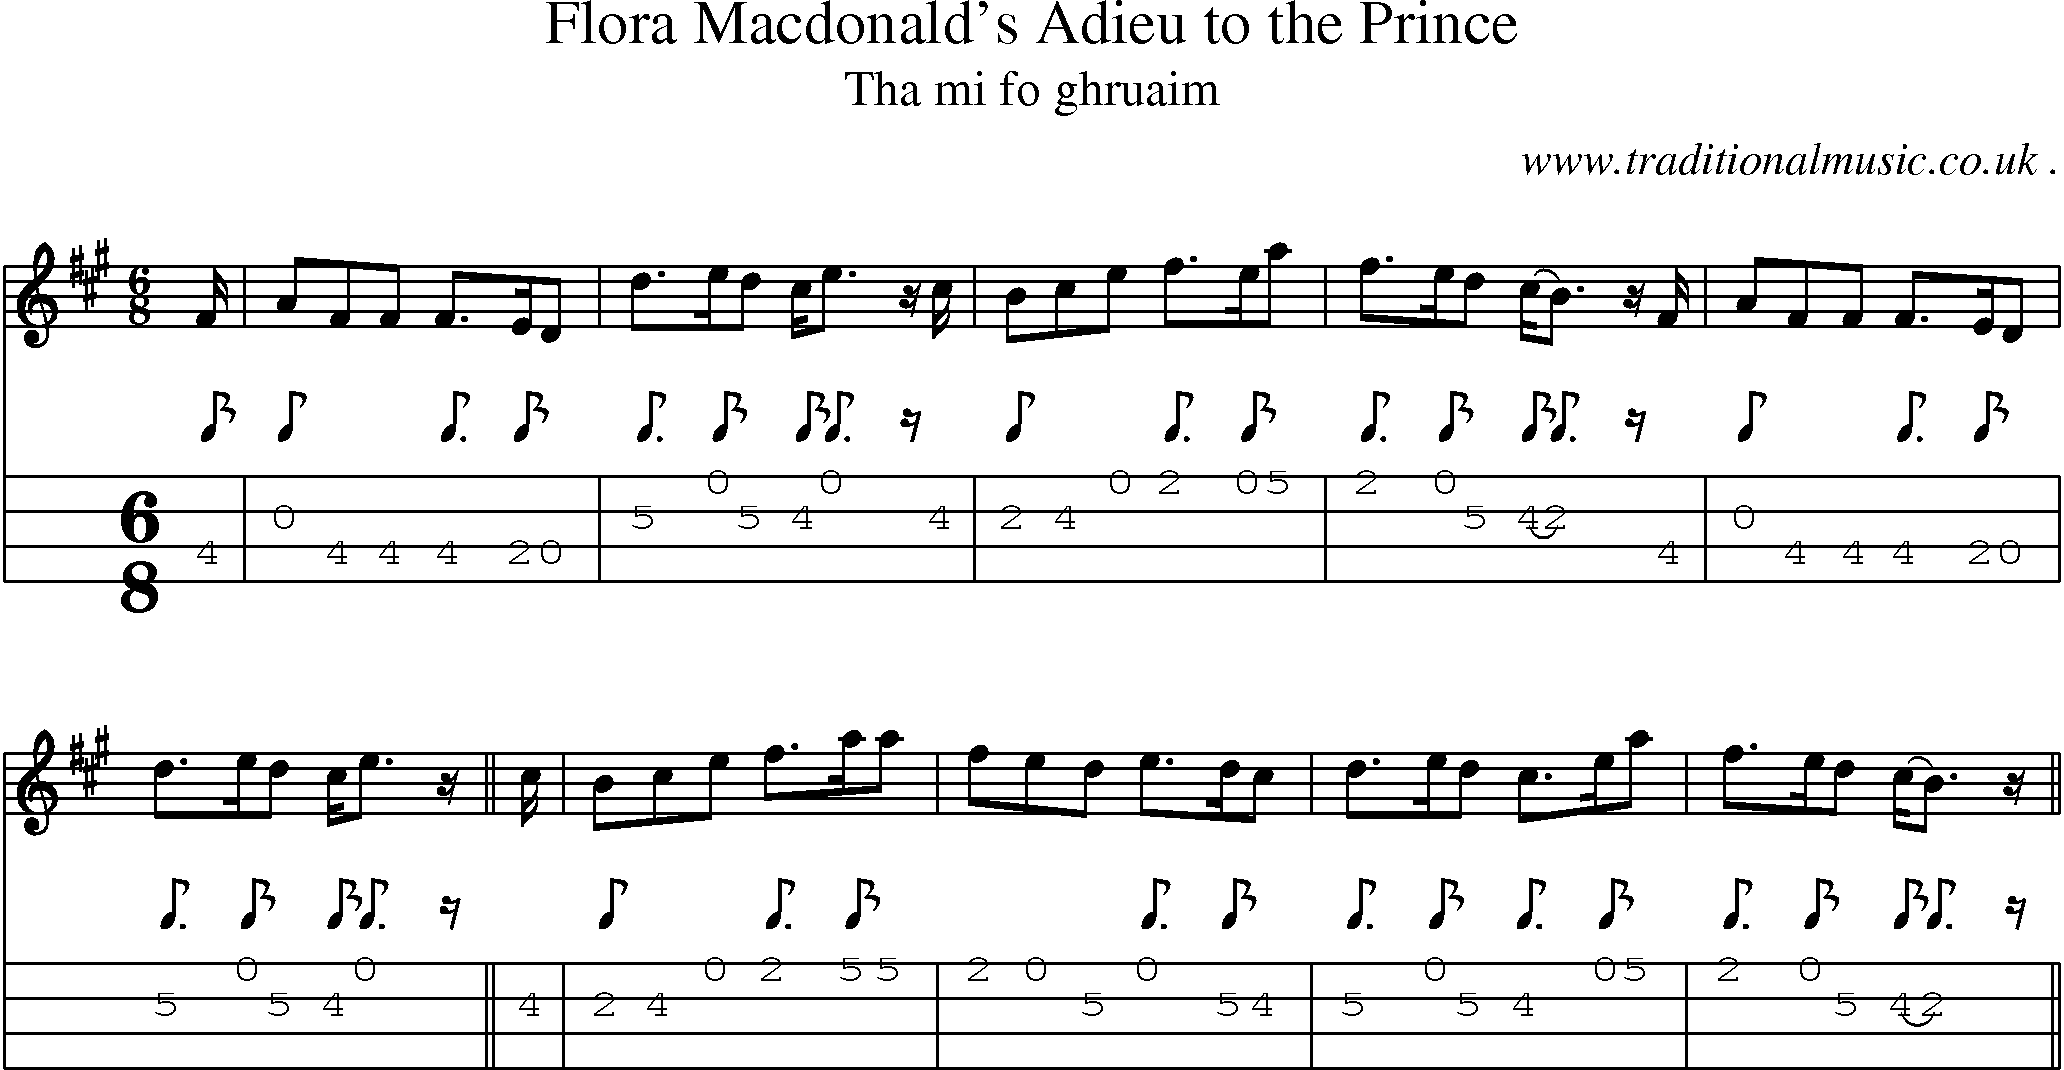 Sheet-music  score, Chords and Mandolin Tabs for Flora Macdonalds Adieu To The Prince